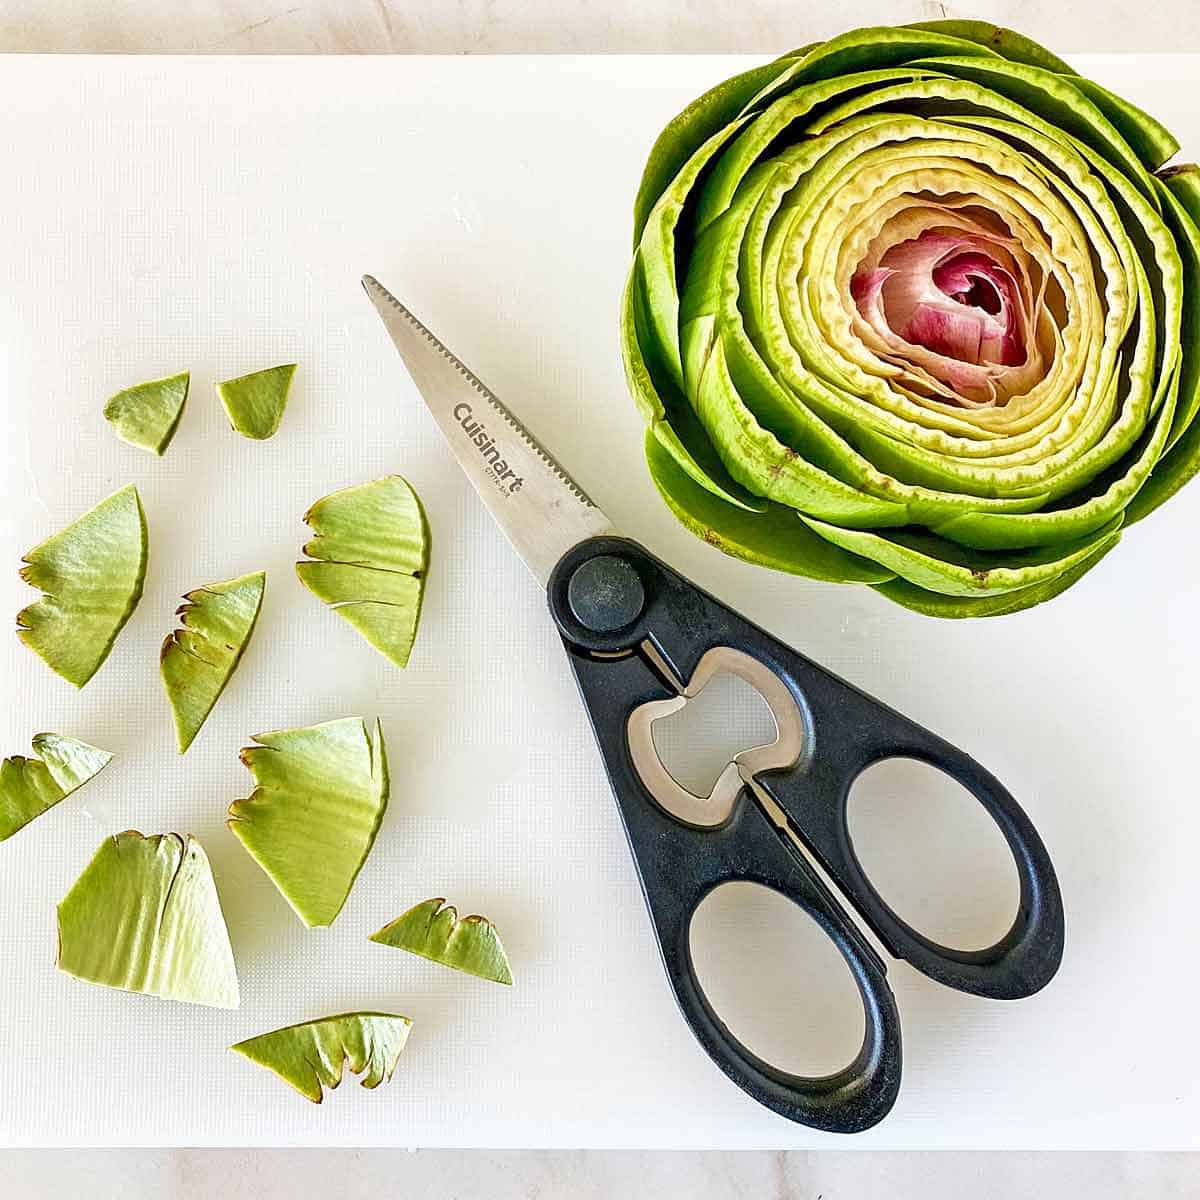 An artichoke on a cutting board with kitchen scissors and cut leaf points.